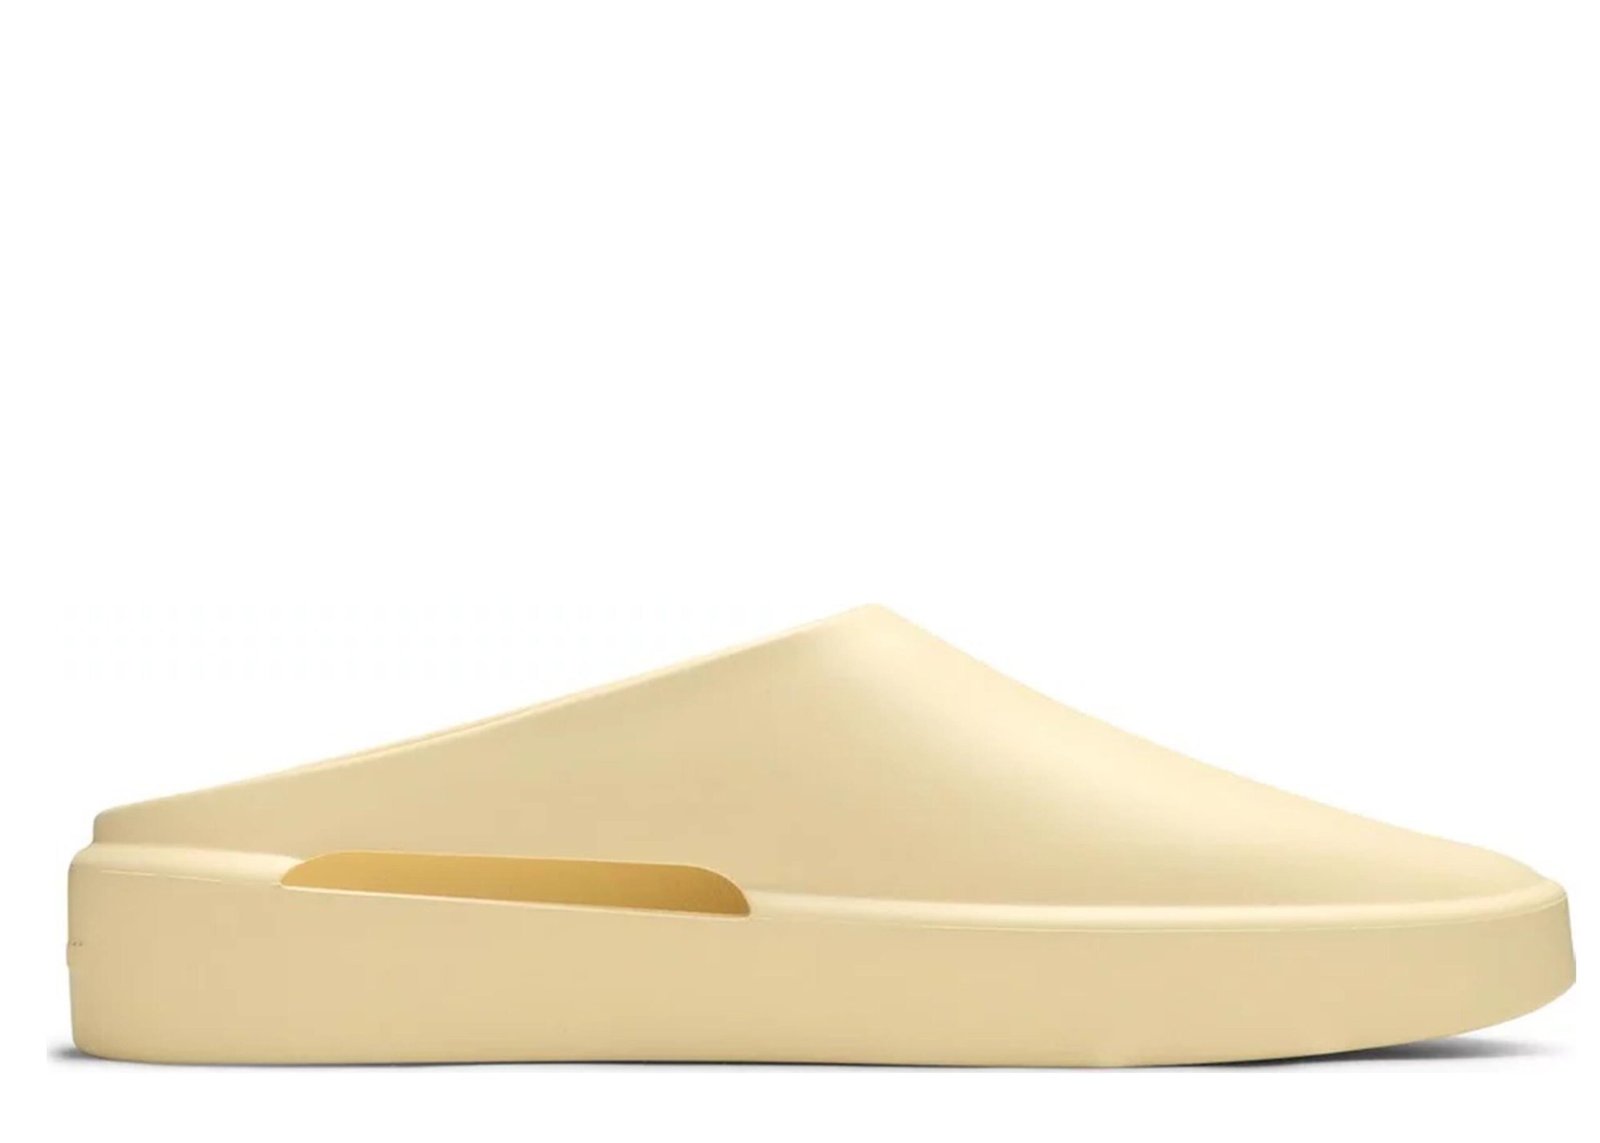 Nike Fear Of God California Backless Slip-On 'Cream'there